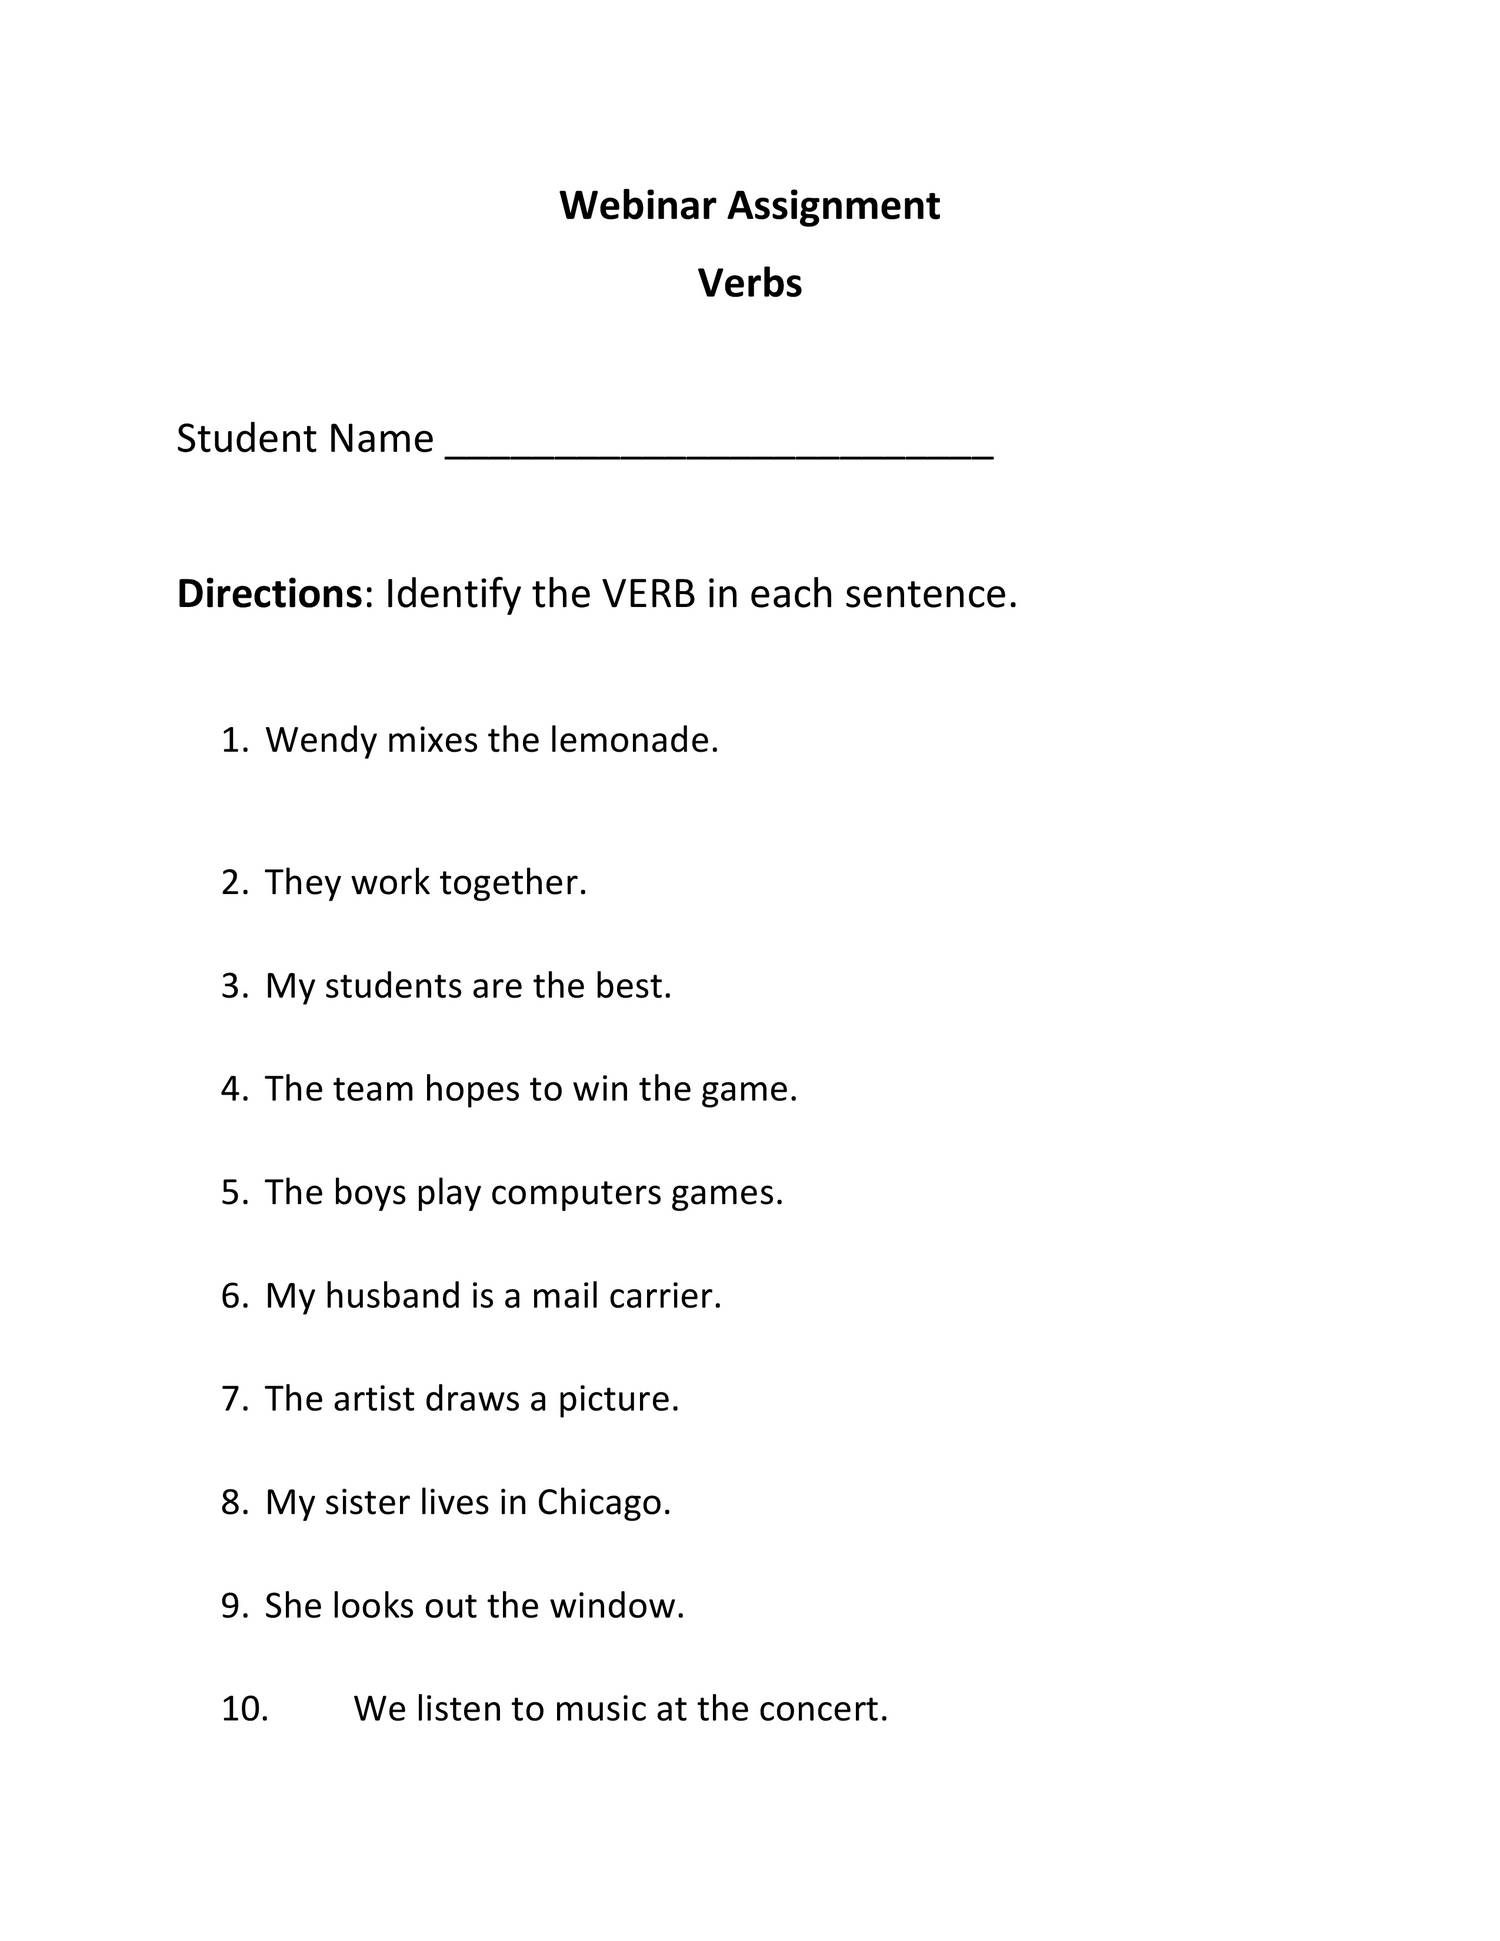 assignment for verb